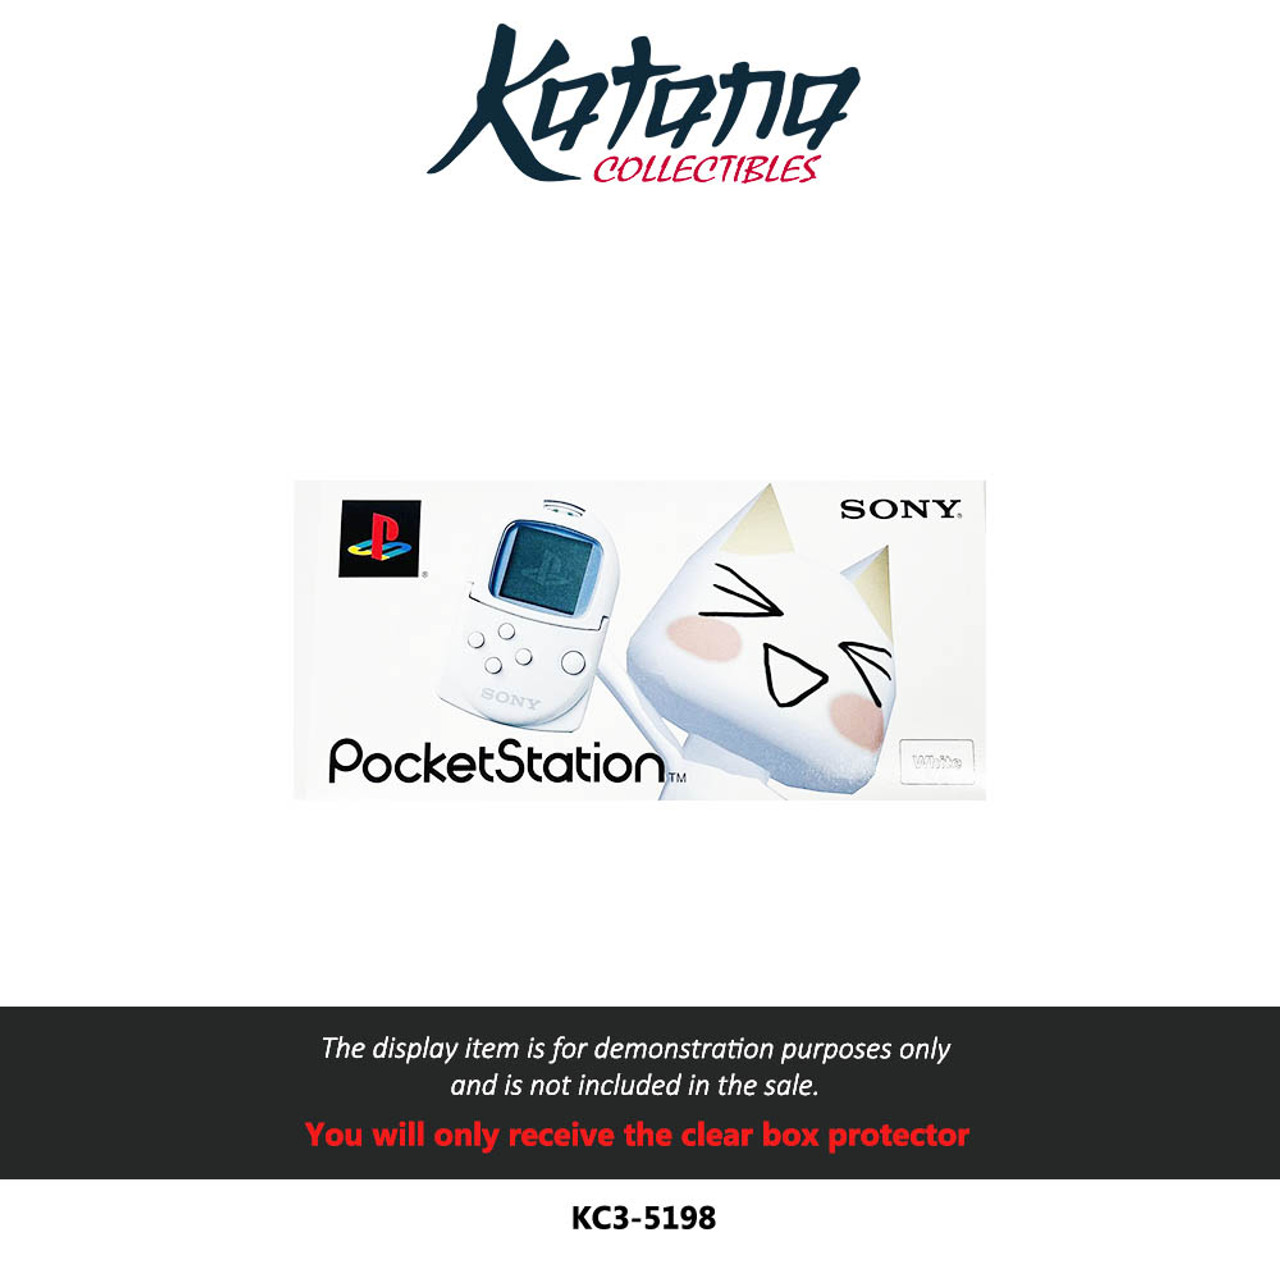 Protector For pocket station package box - Katana Collectibles